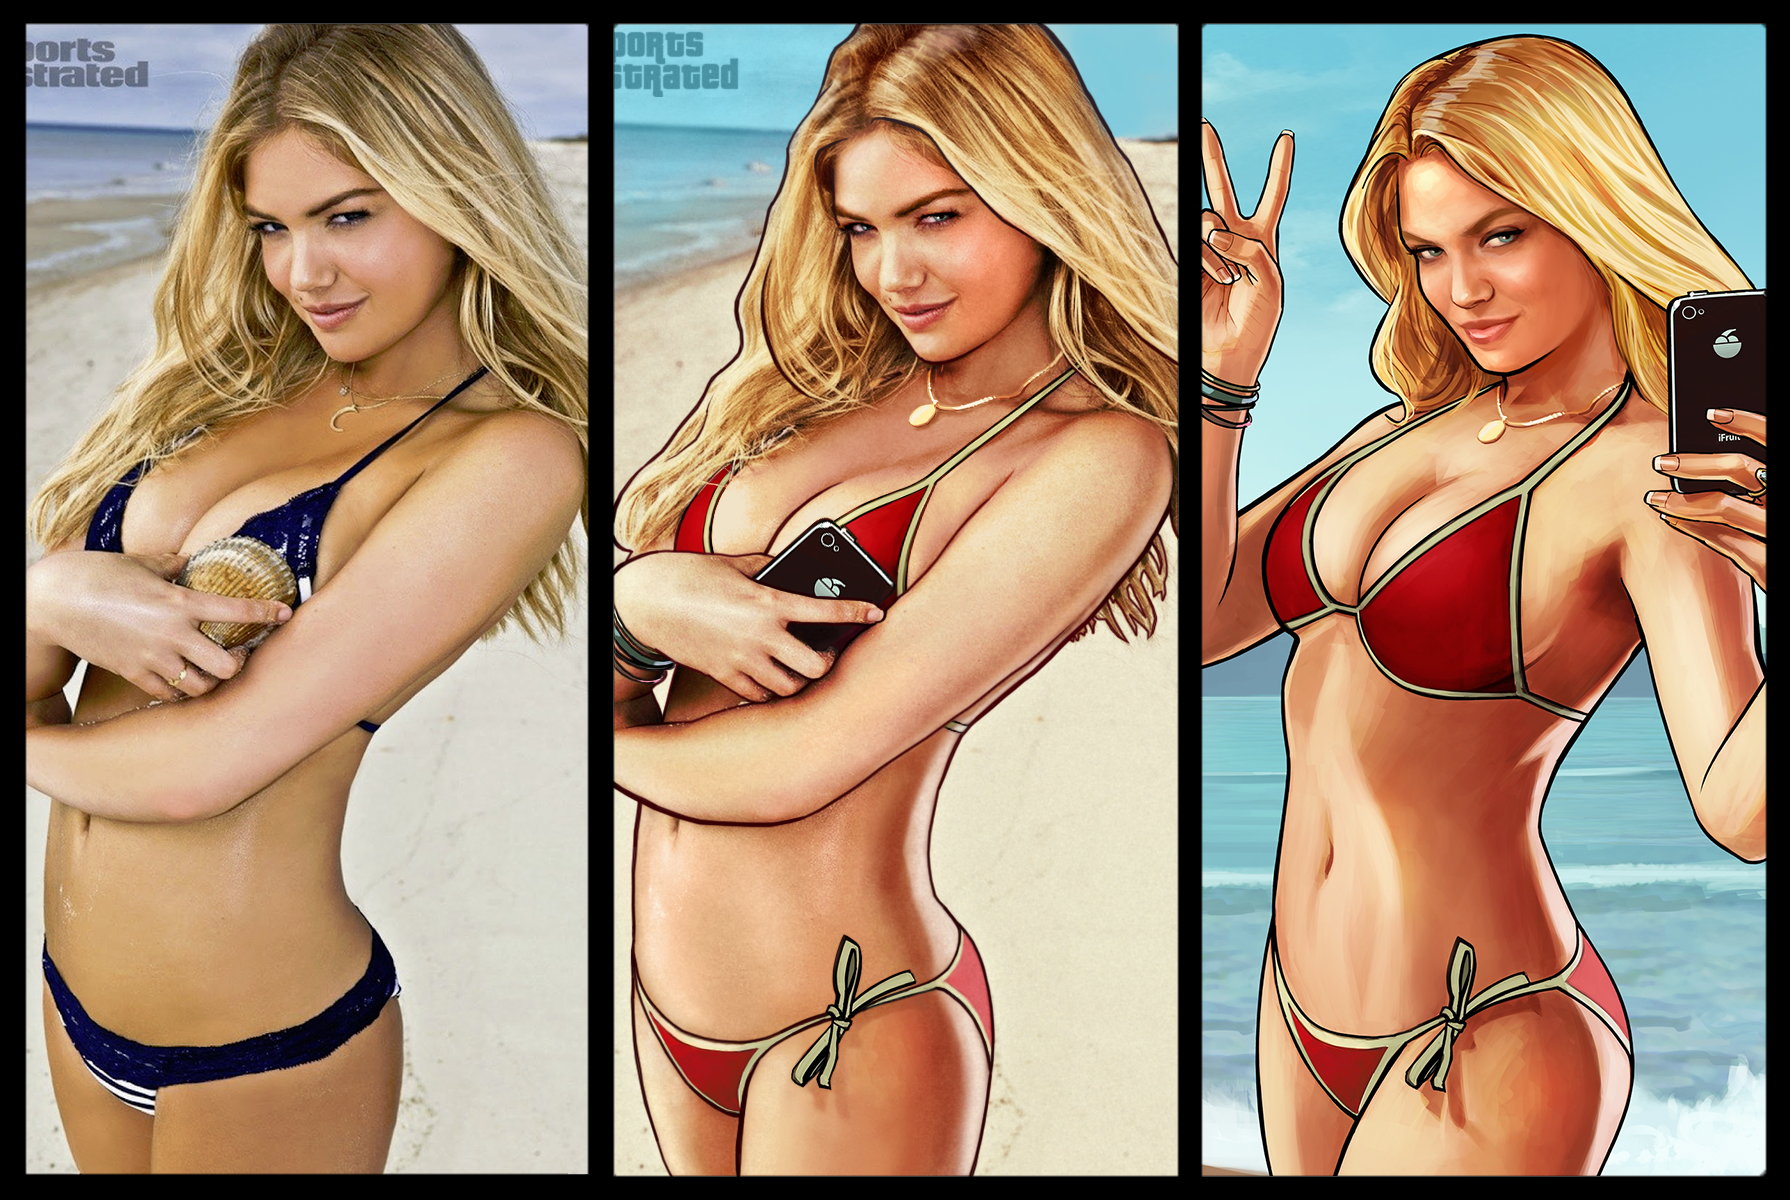 Thats not Kate Upton in the Grand Theft Auto V ads—its this model pic